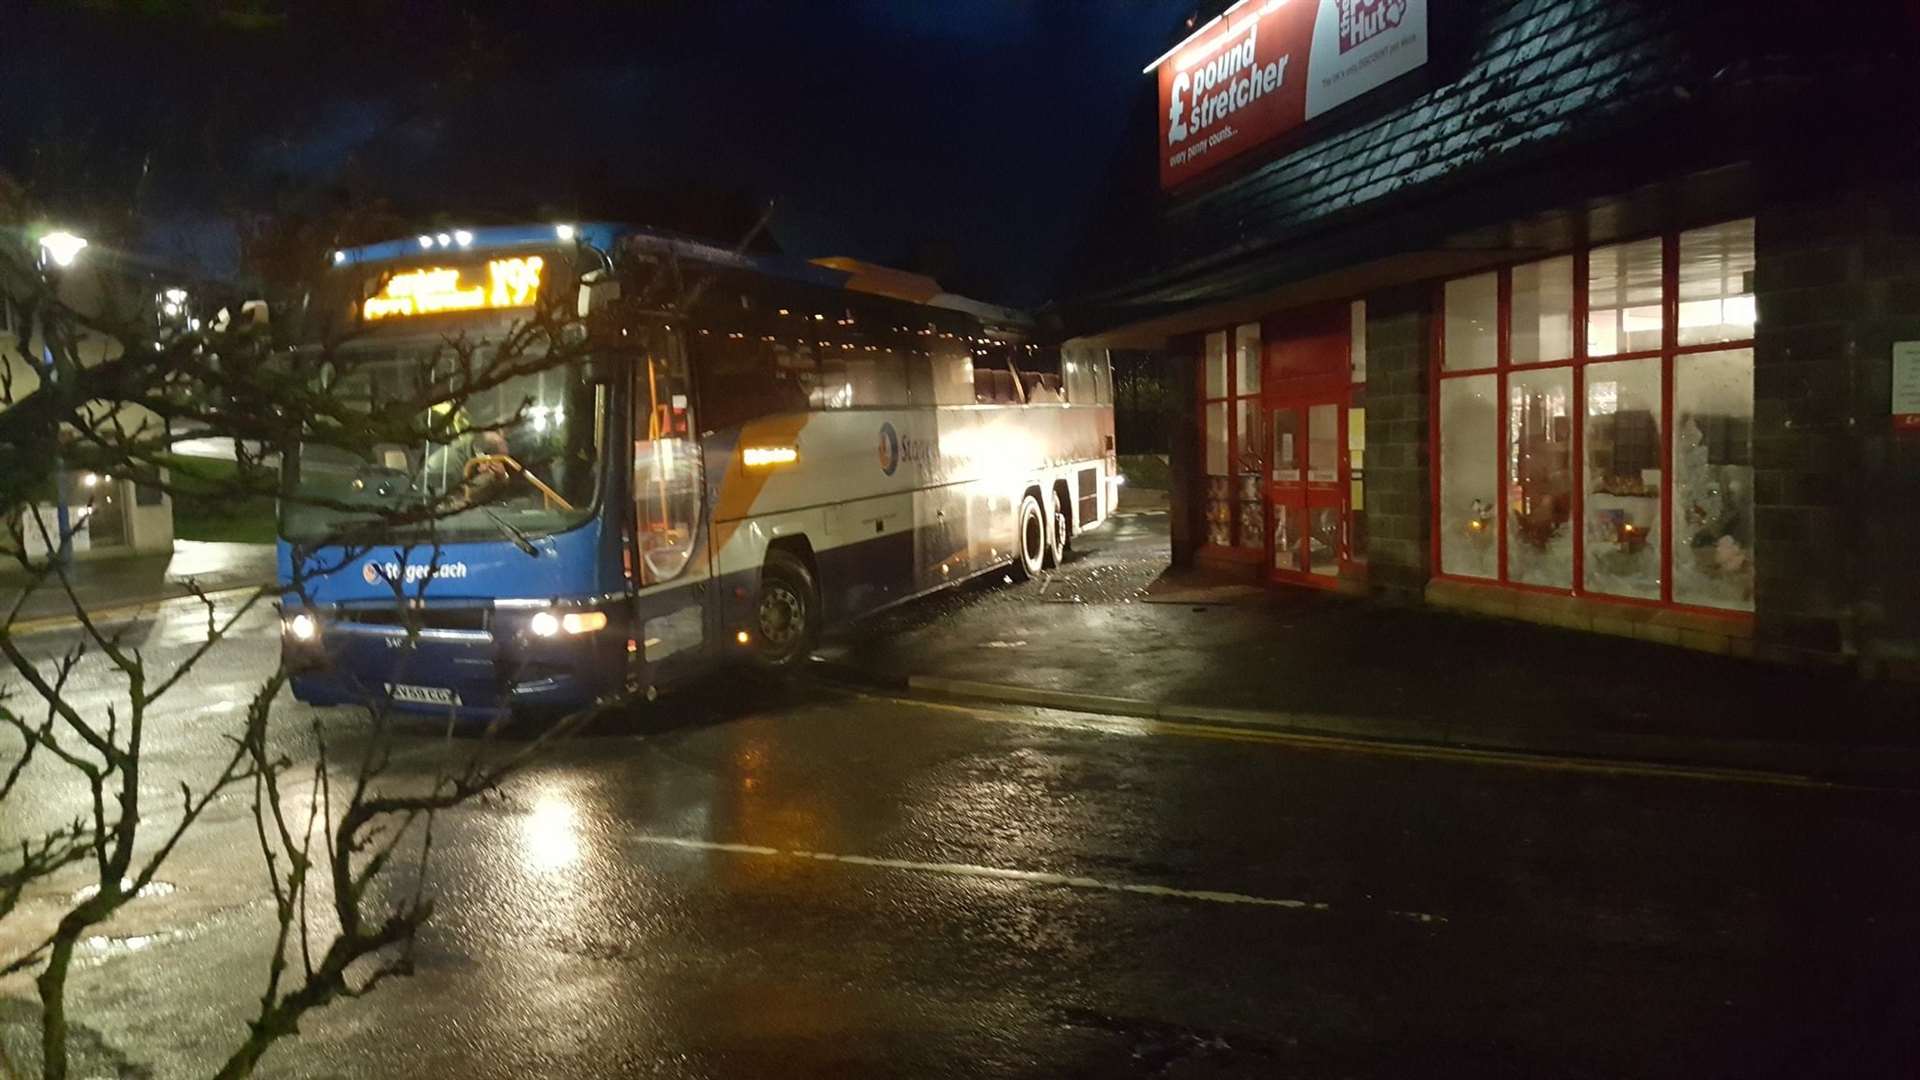 The X99 bus had arrived in Wick town centre at around 7am and slid on black ice into the Poundstretcher store. Pictures: Jack O'Brien